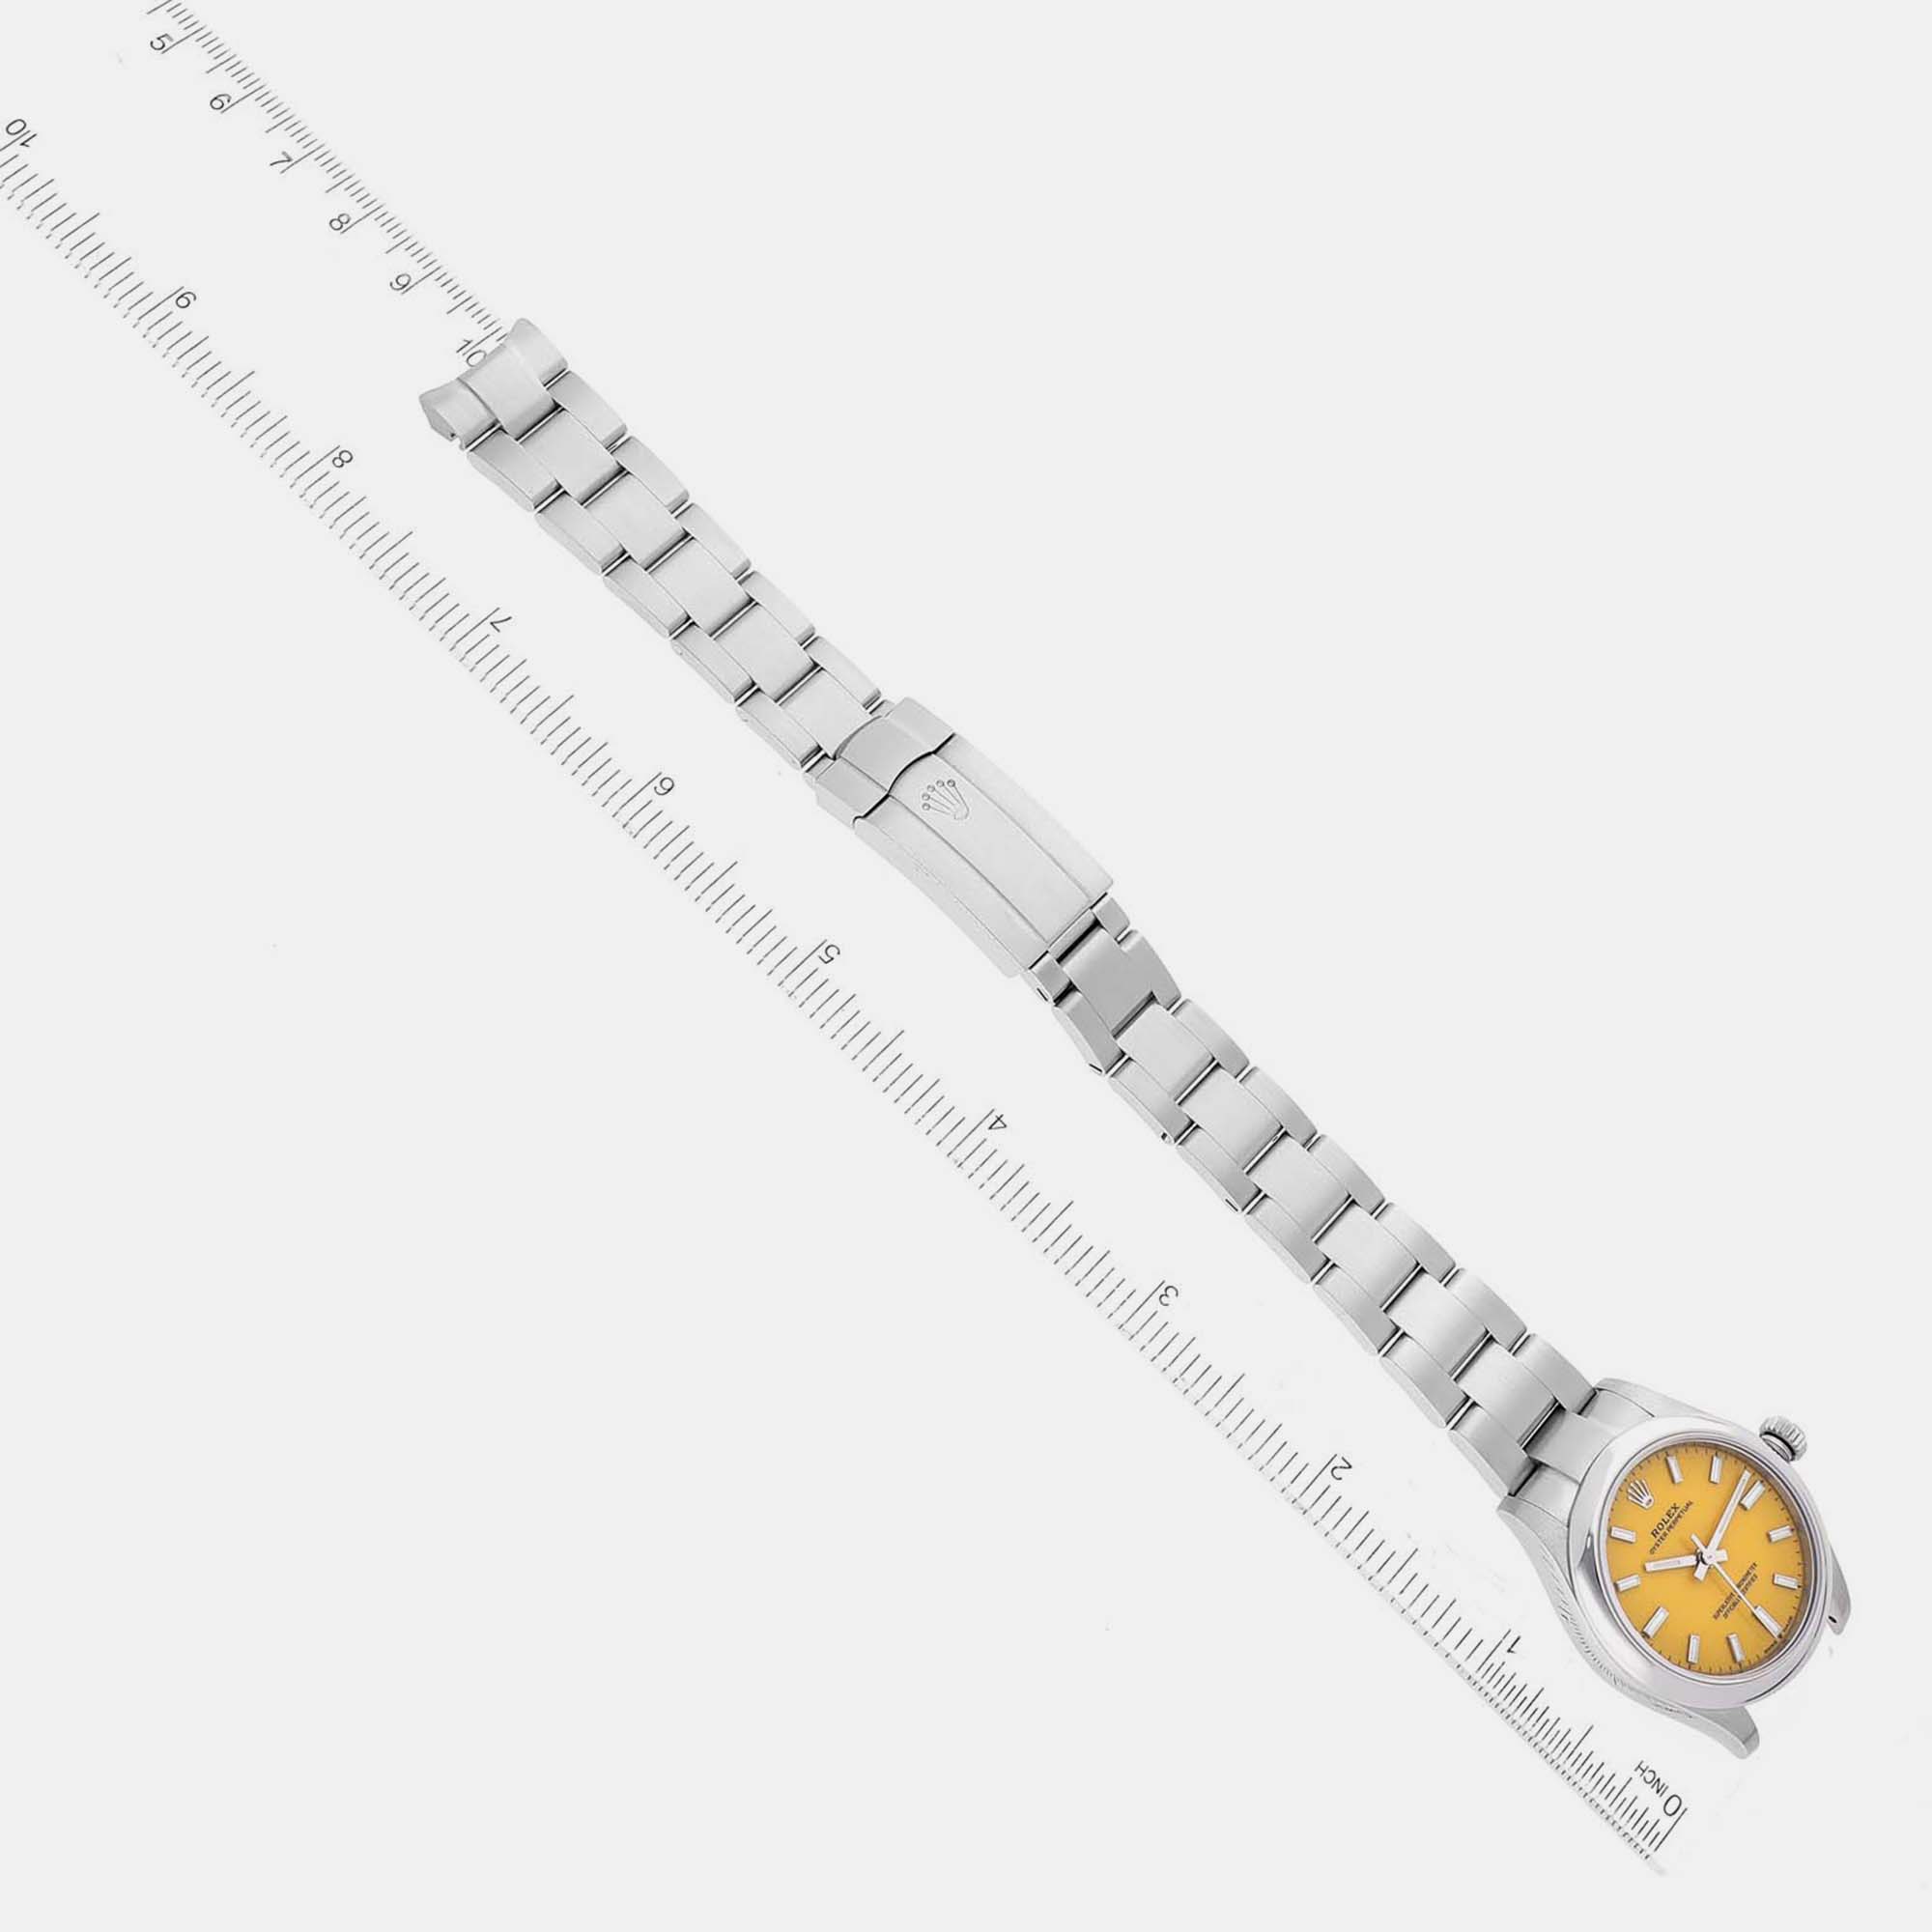 Rolex Oyster Perpetual Midsize Yellow Dial Steel Ladies Watch 277200 31 Mm